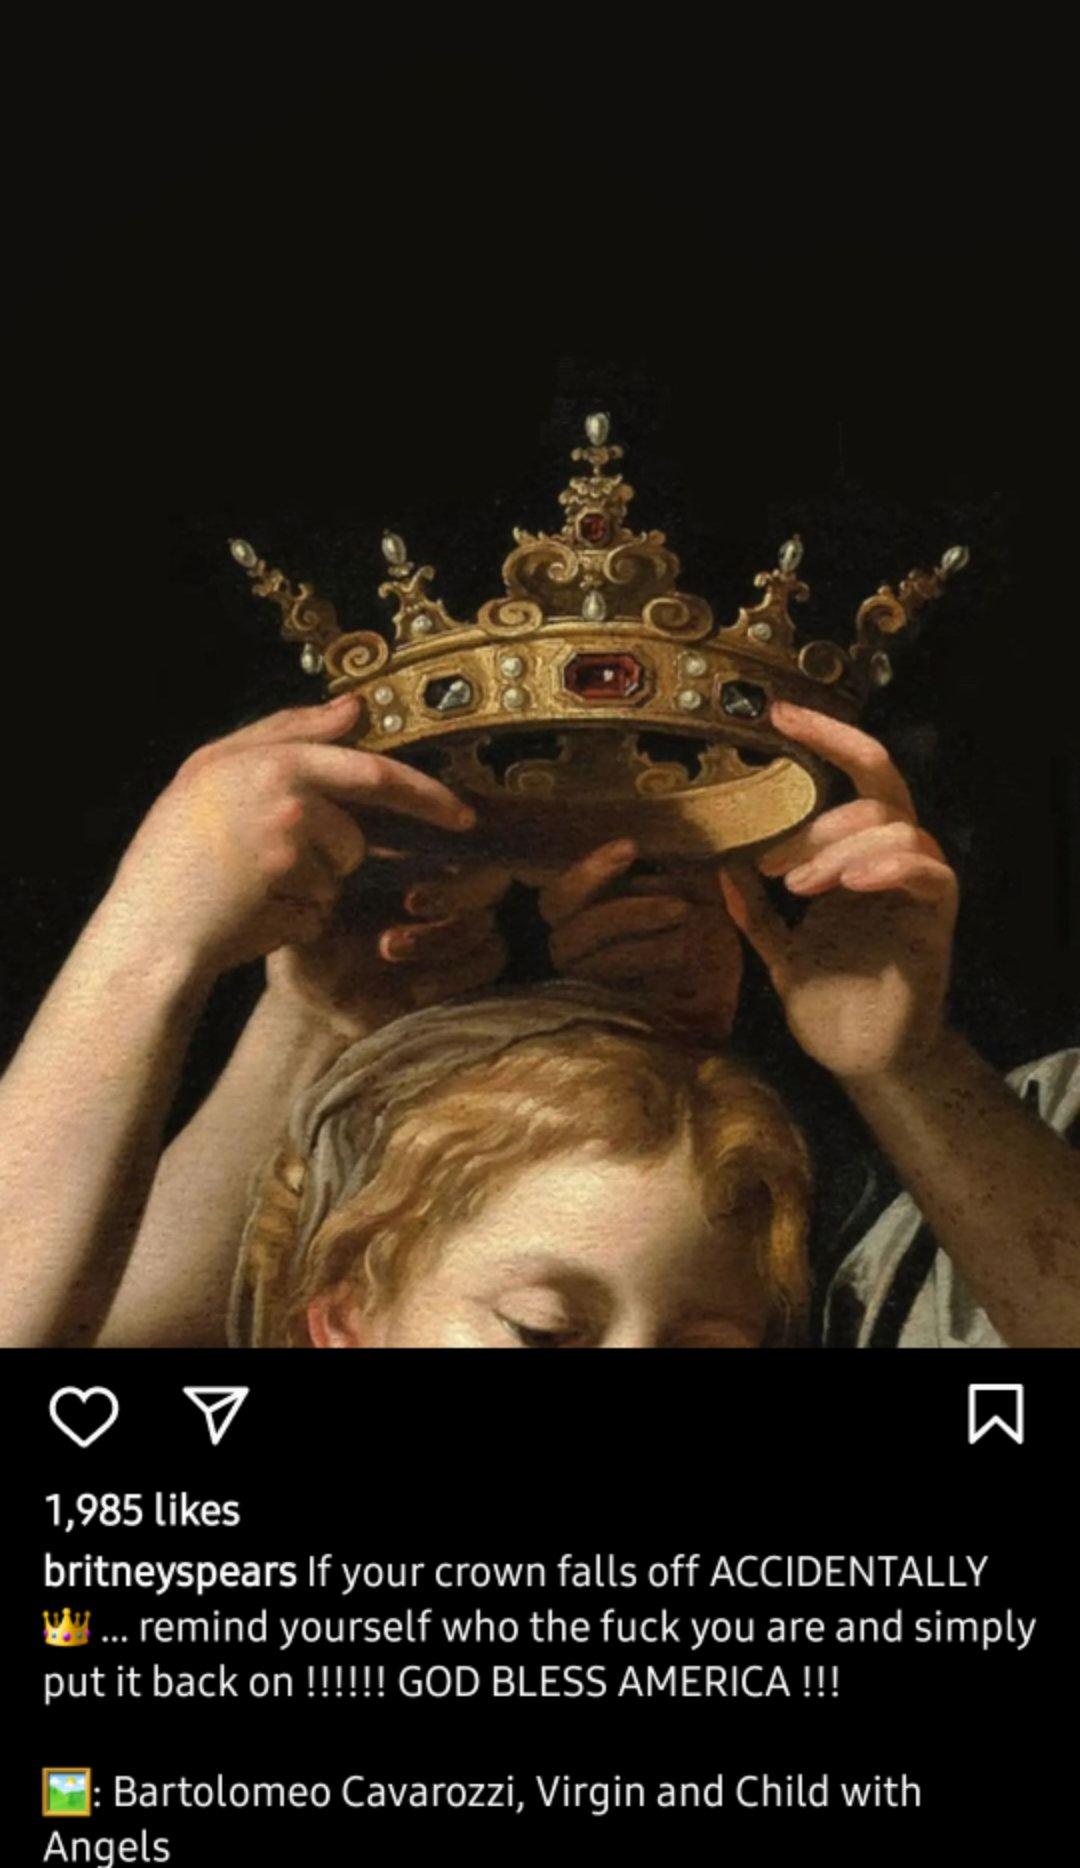 Britney Spears posts a photo of a crown